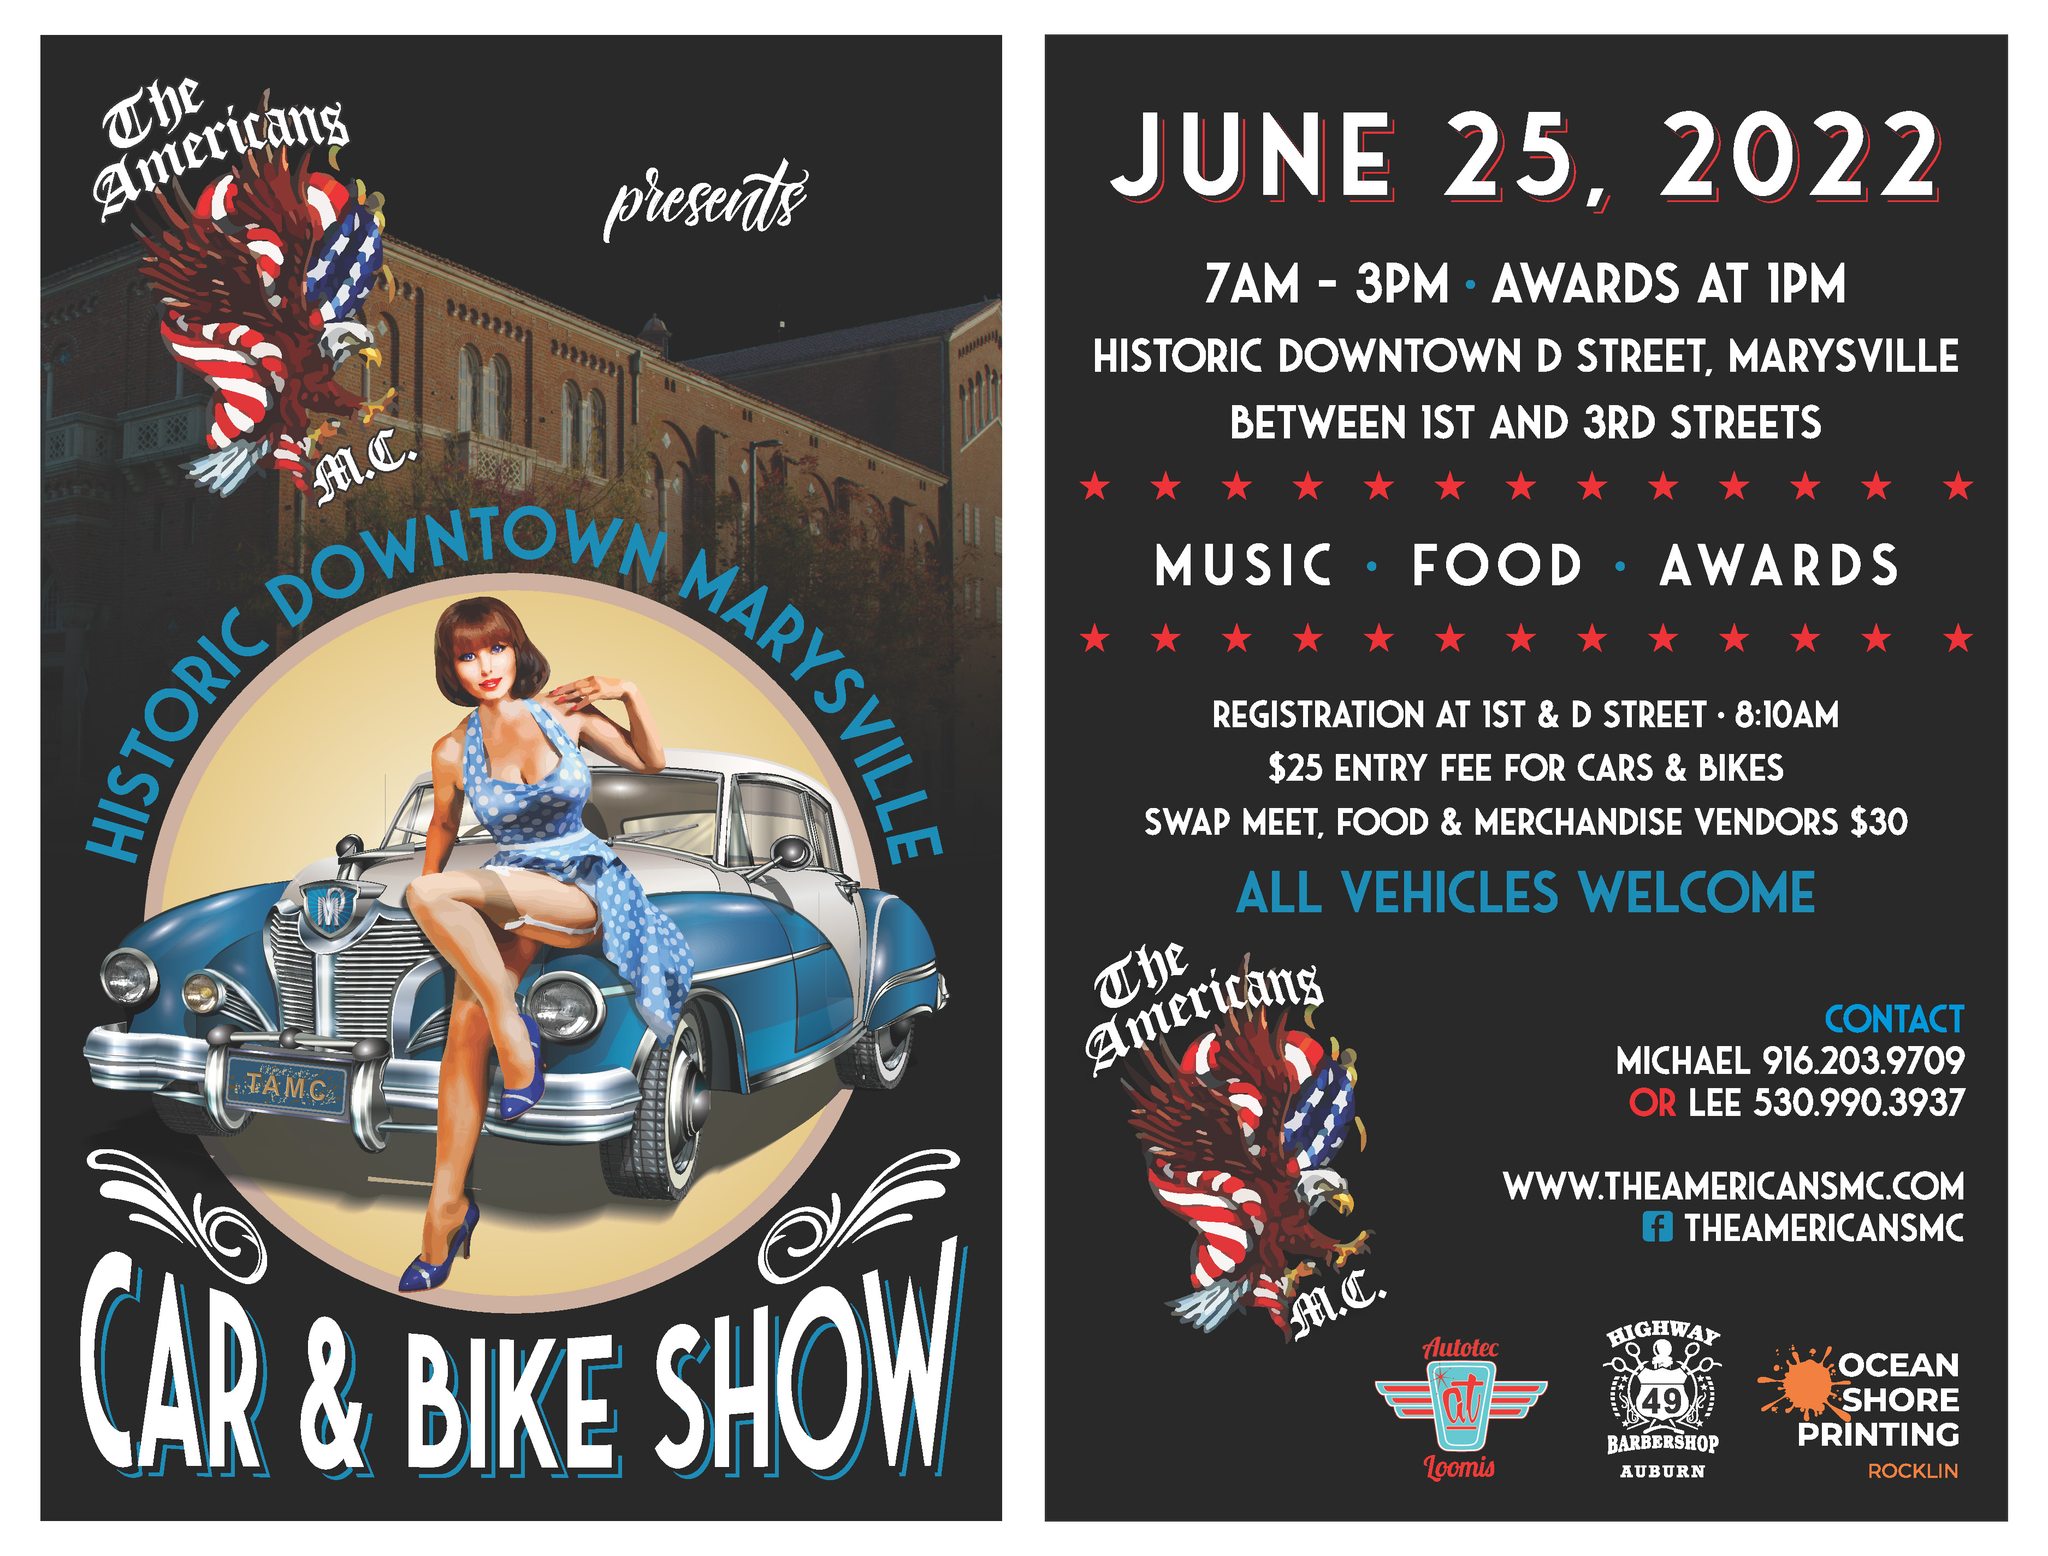 Historic Downtown Marysville Car and Bike Show